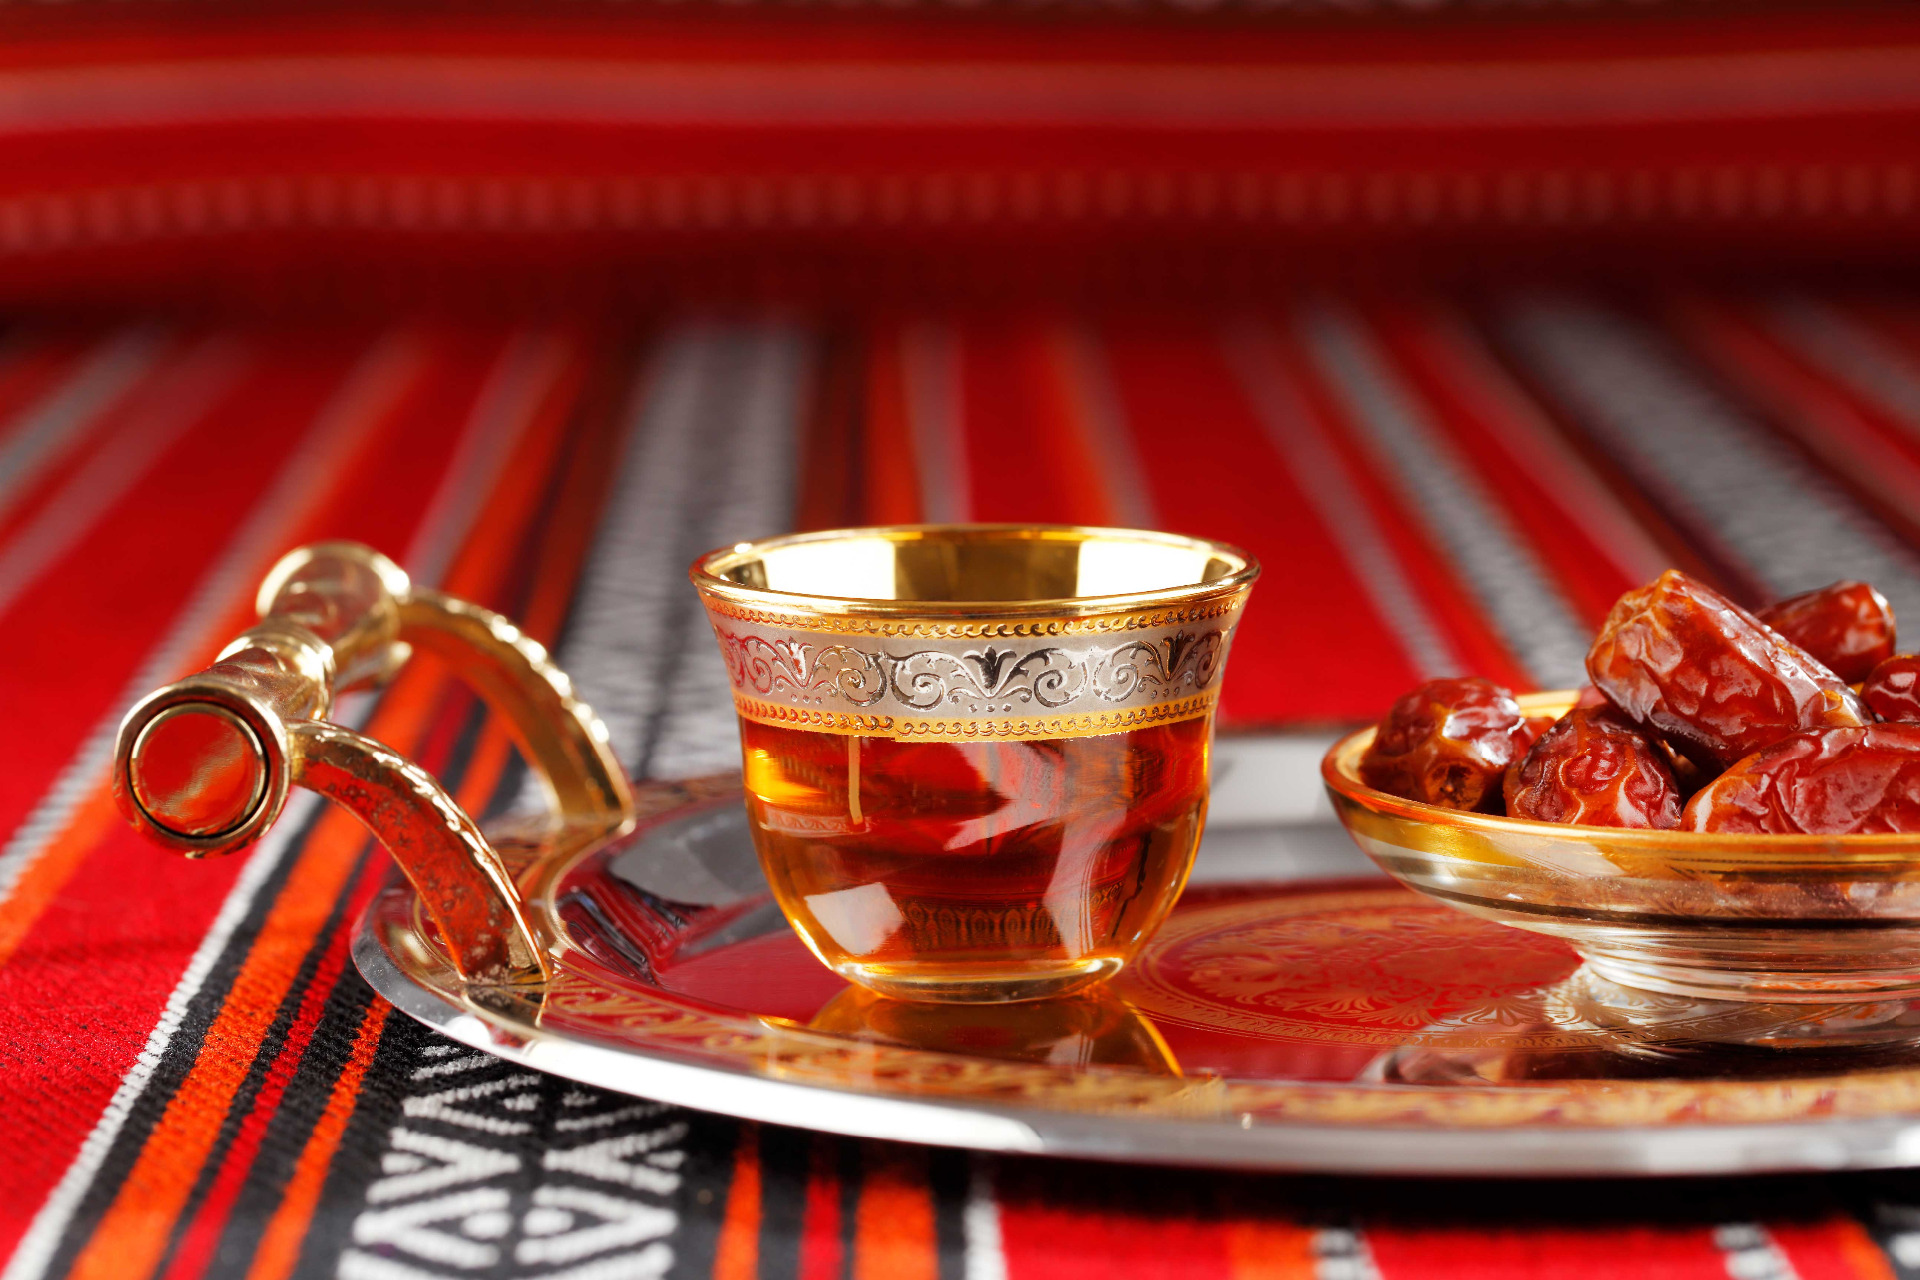 Arabic tea and dates on an ornate tray